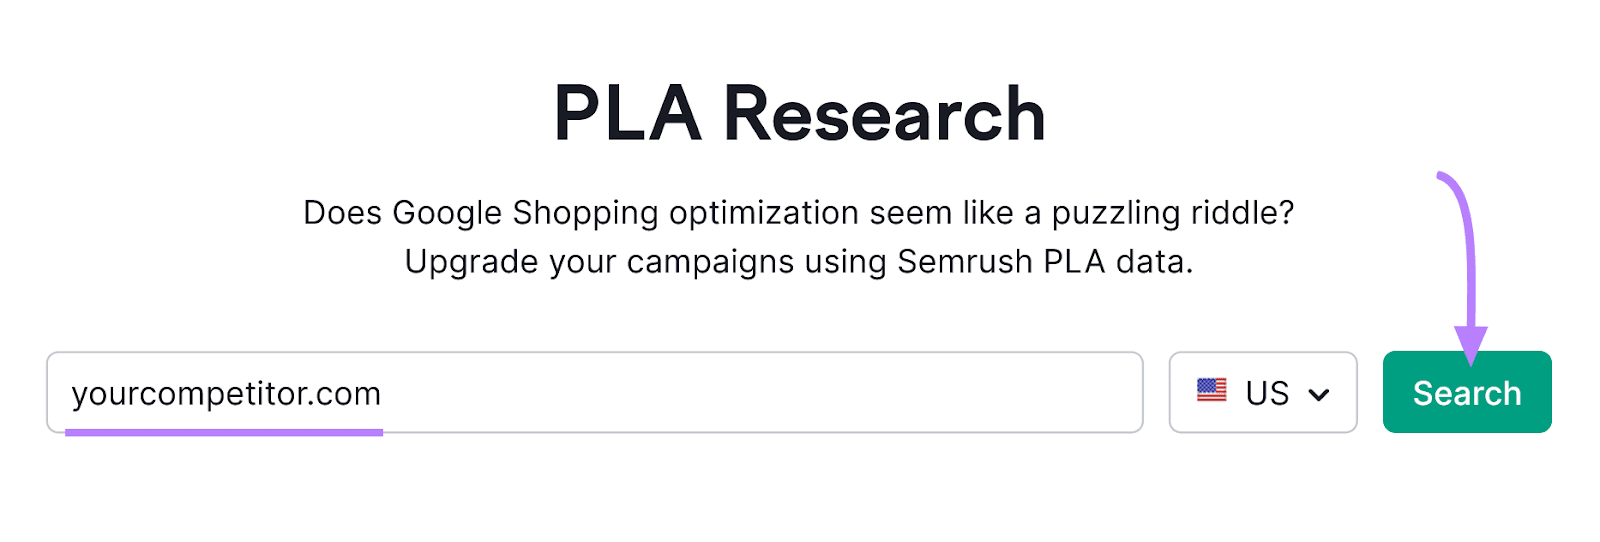 PLA Research tool